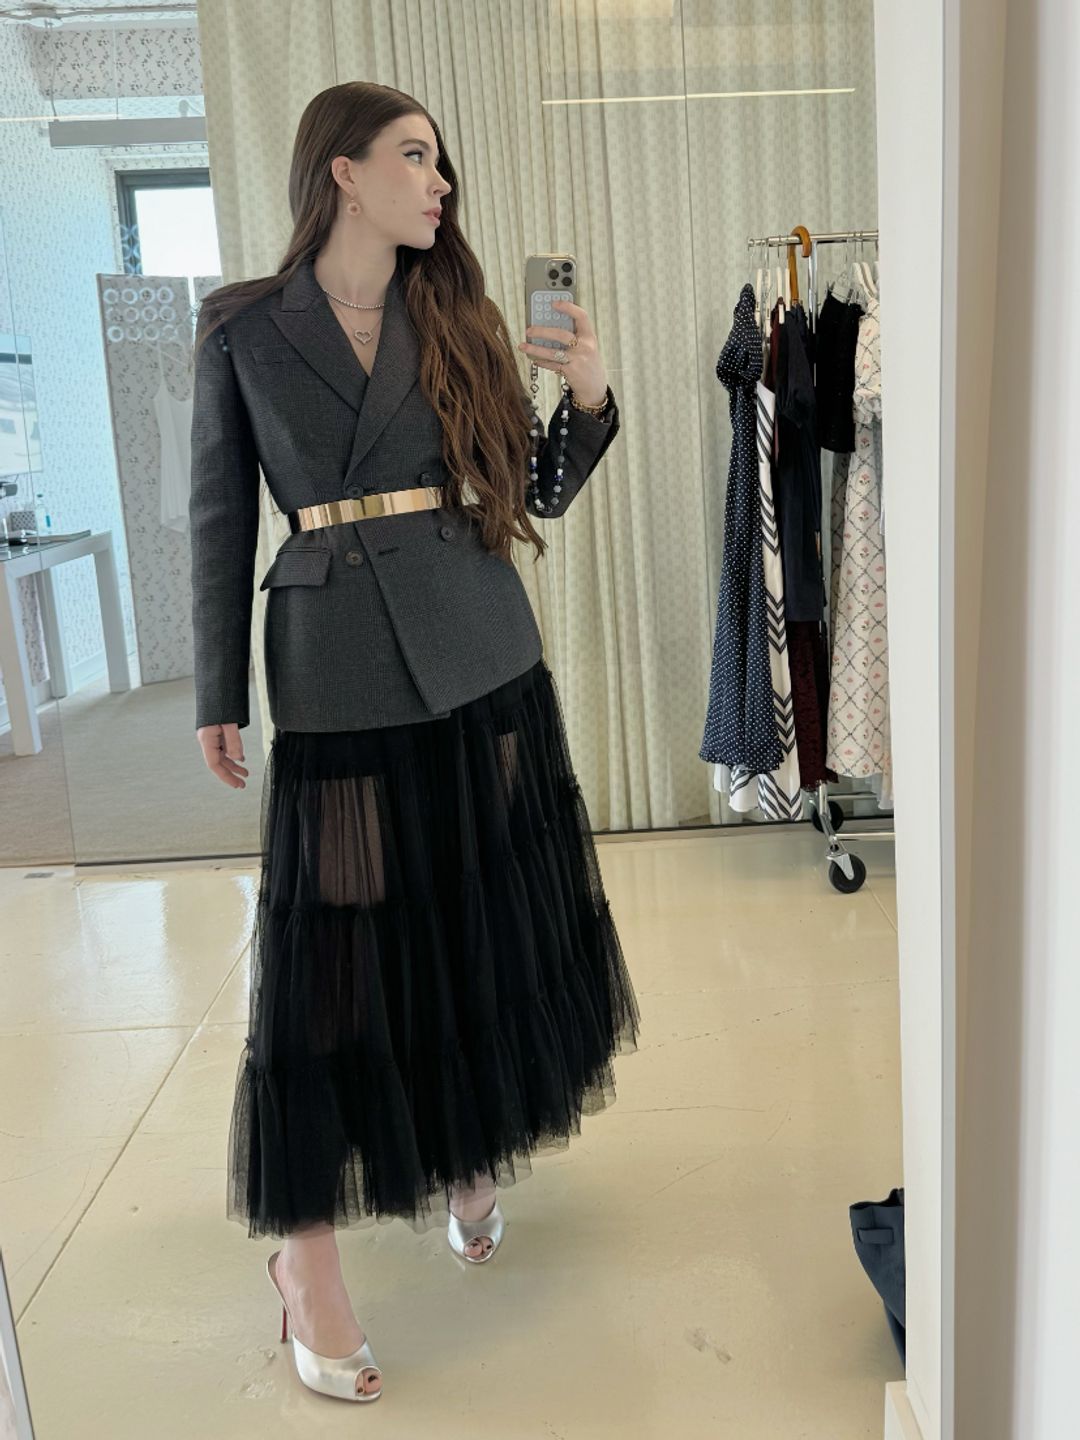 Nell Diamond poses in a grey blazer and tulle black skirt 